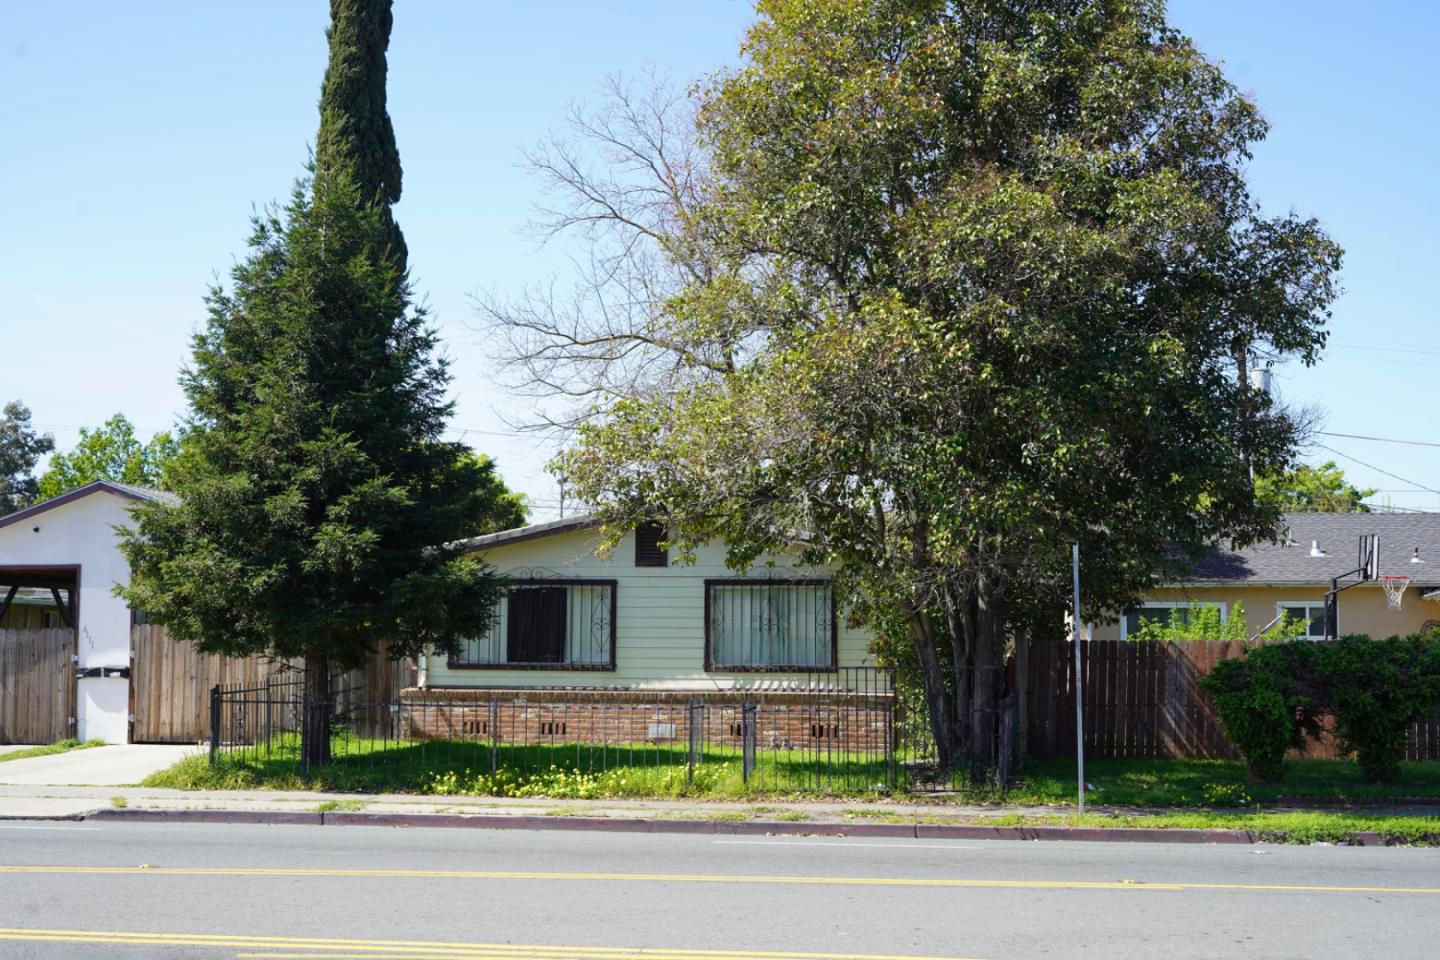 Photo of 4109 N Pershing Ave in Stockton, CA